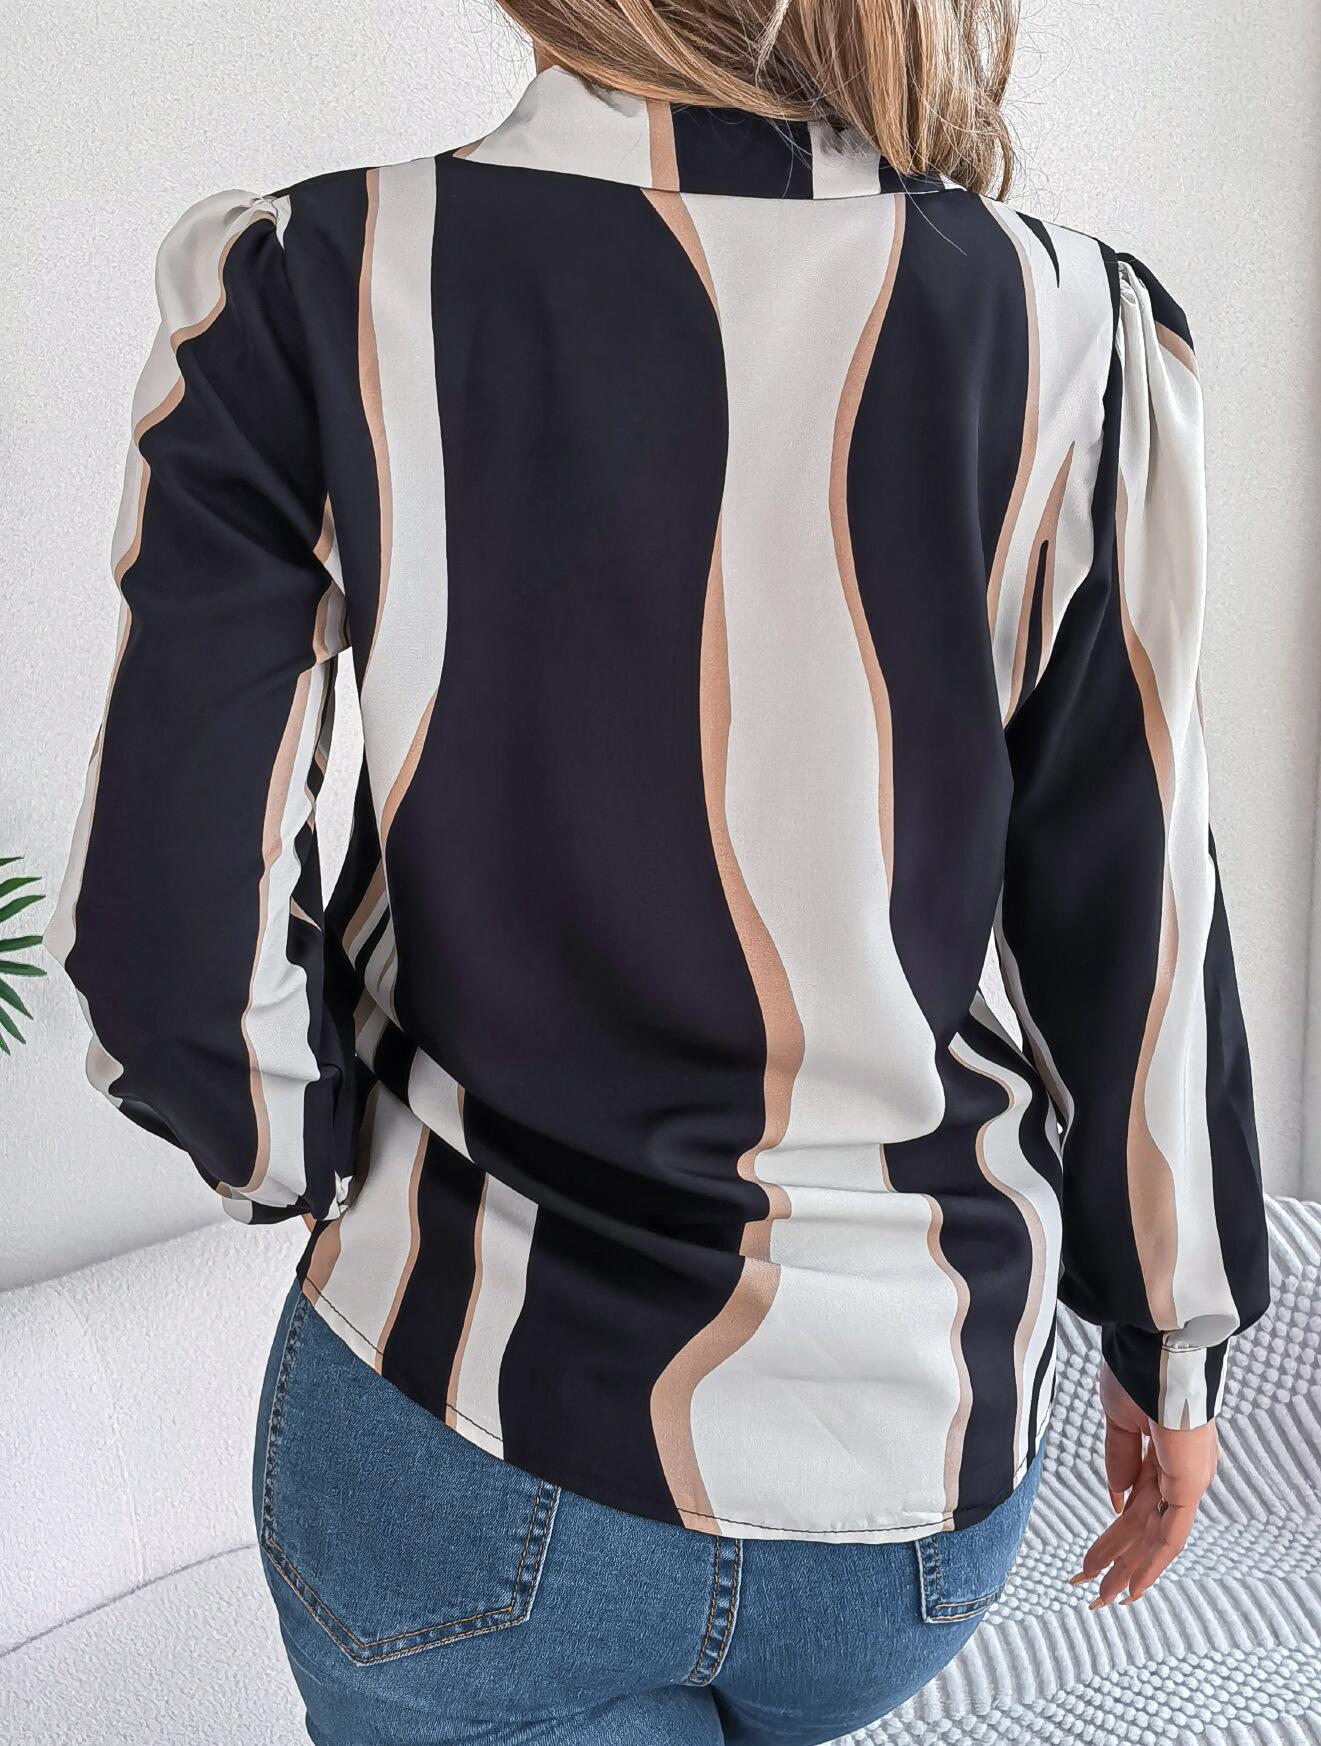 Abstract Striped Print Collared Shirt